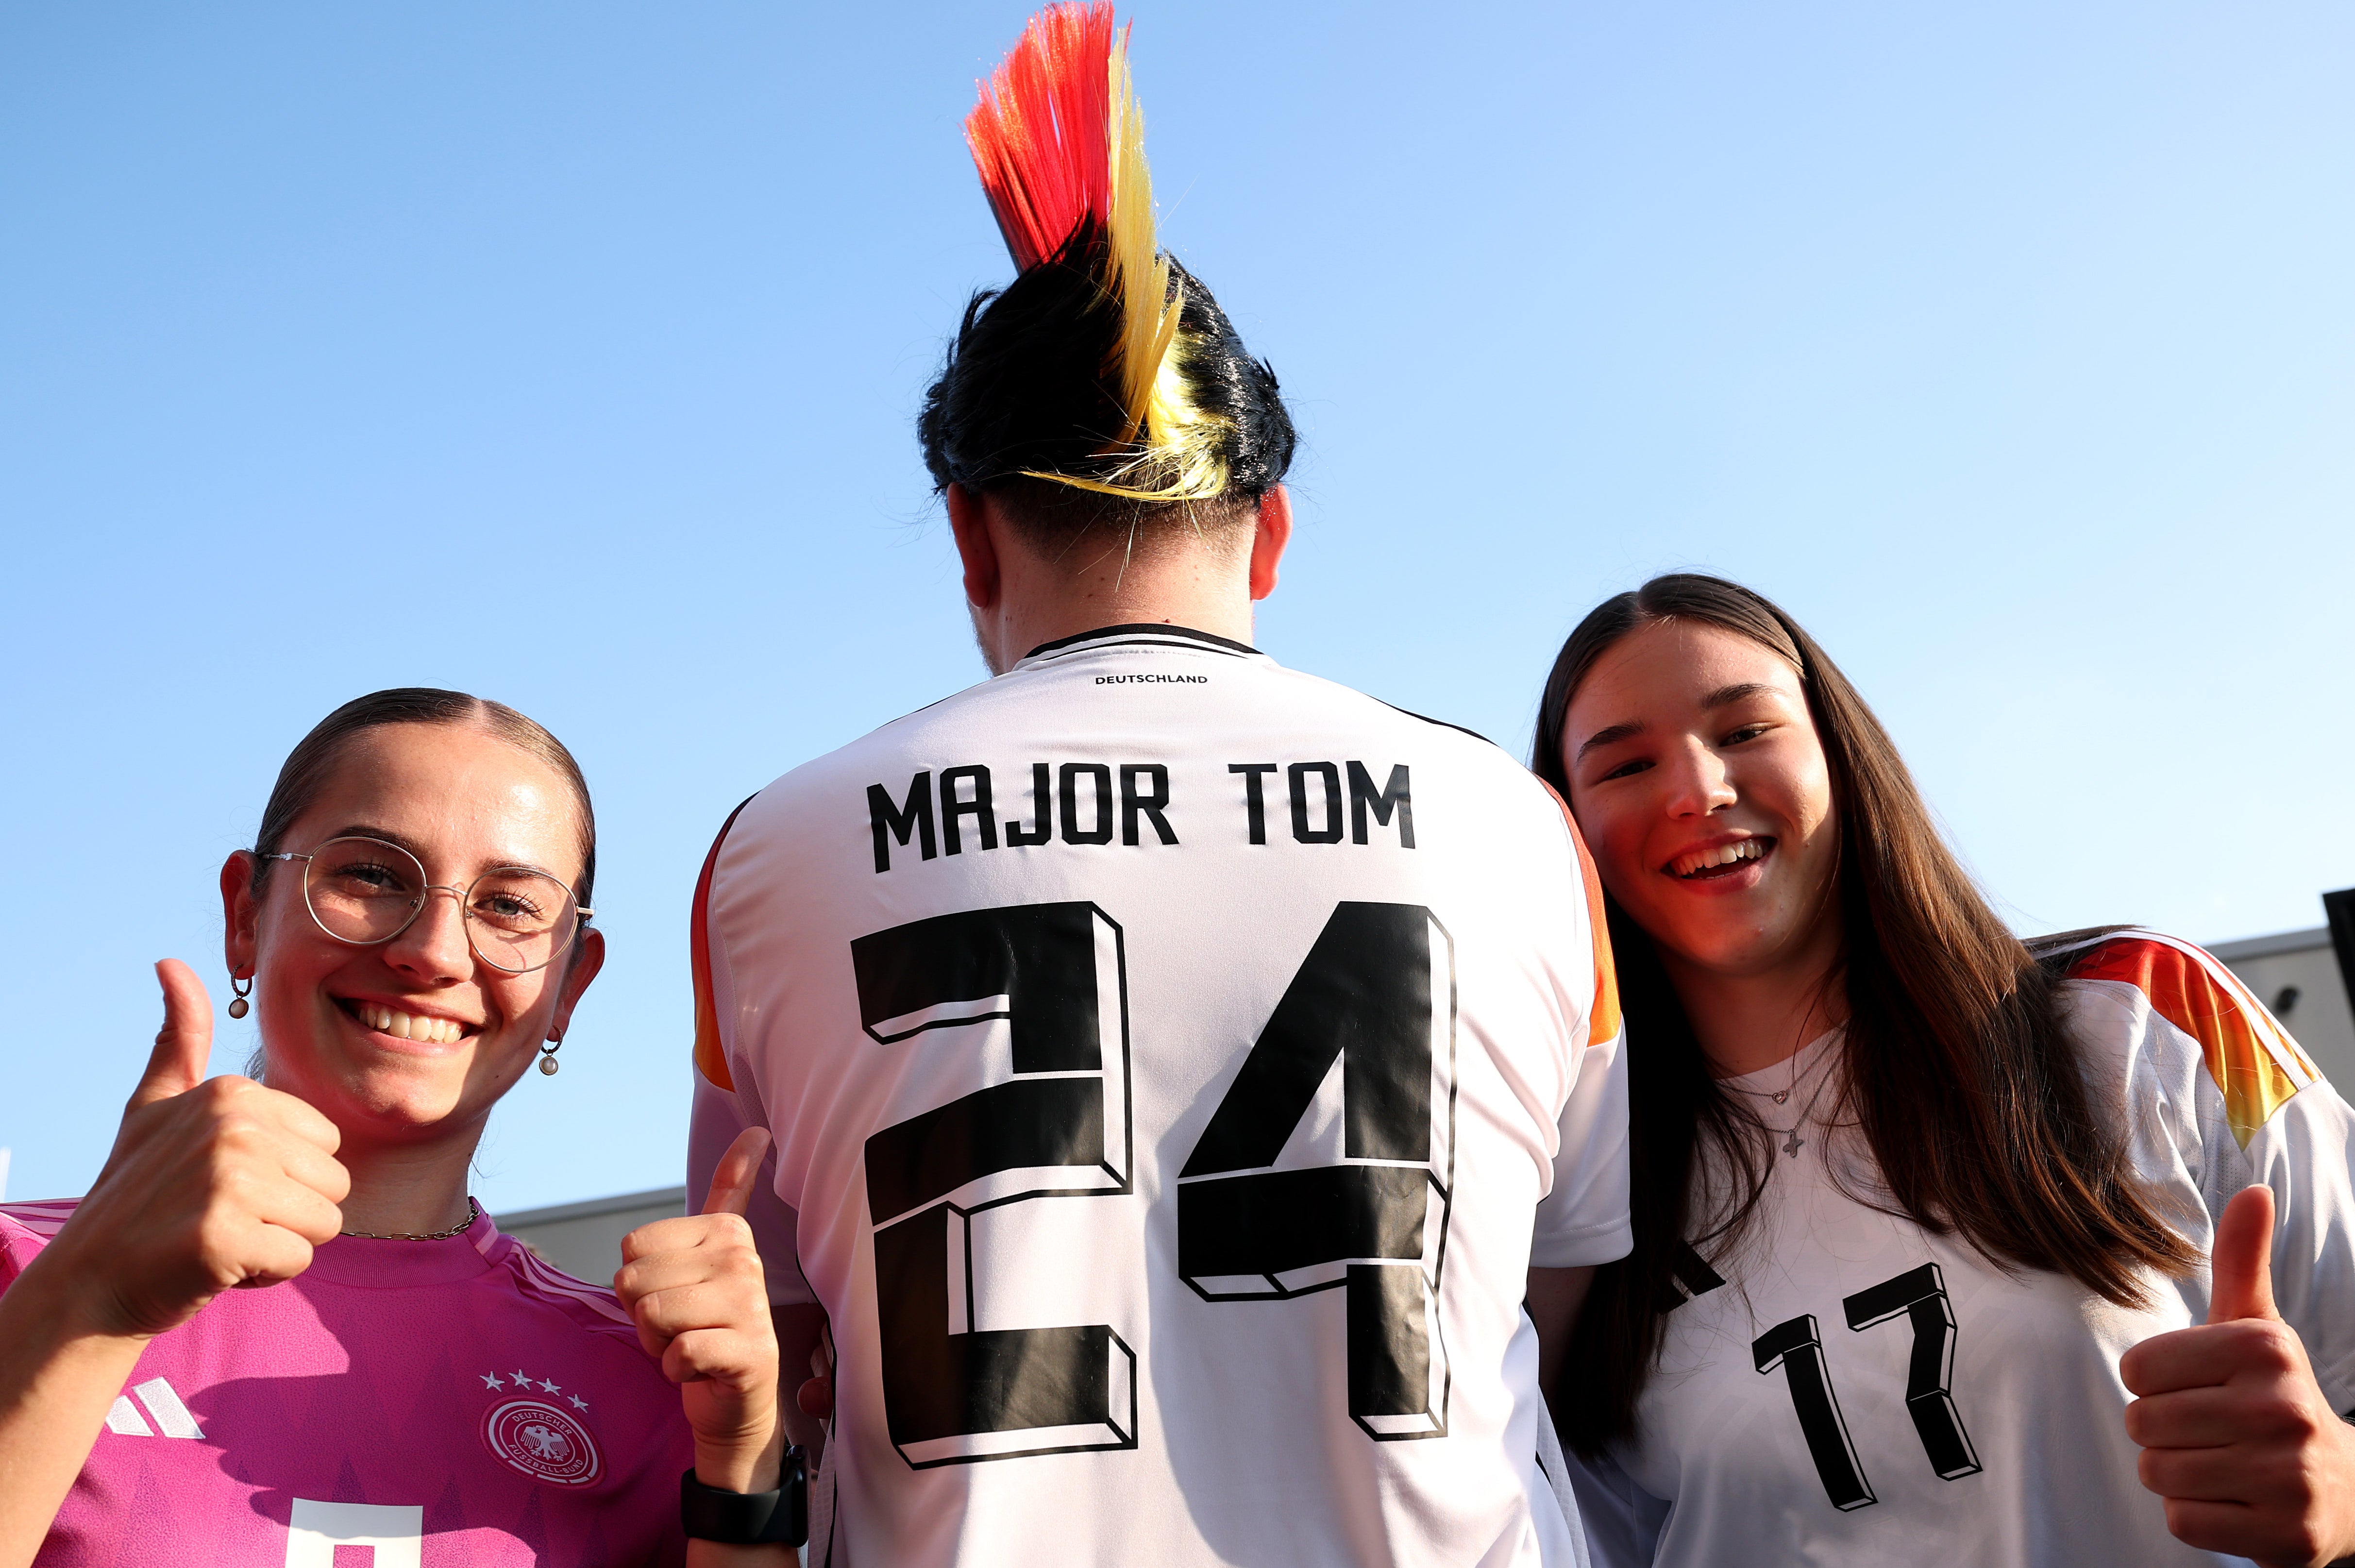 A German fan at the team’s 2-1 win over Greece – their final pre-Euros friendly